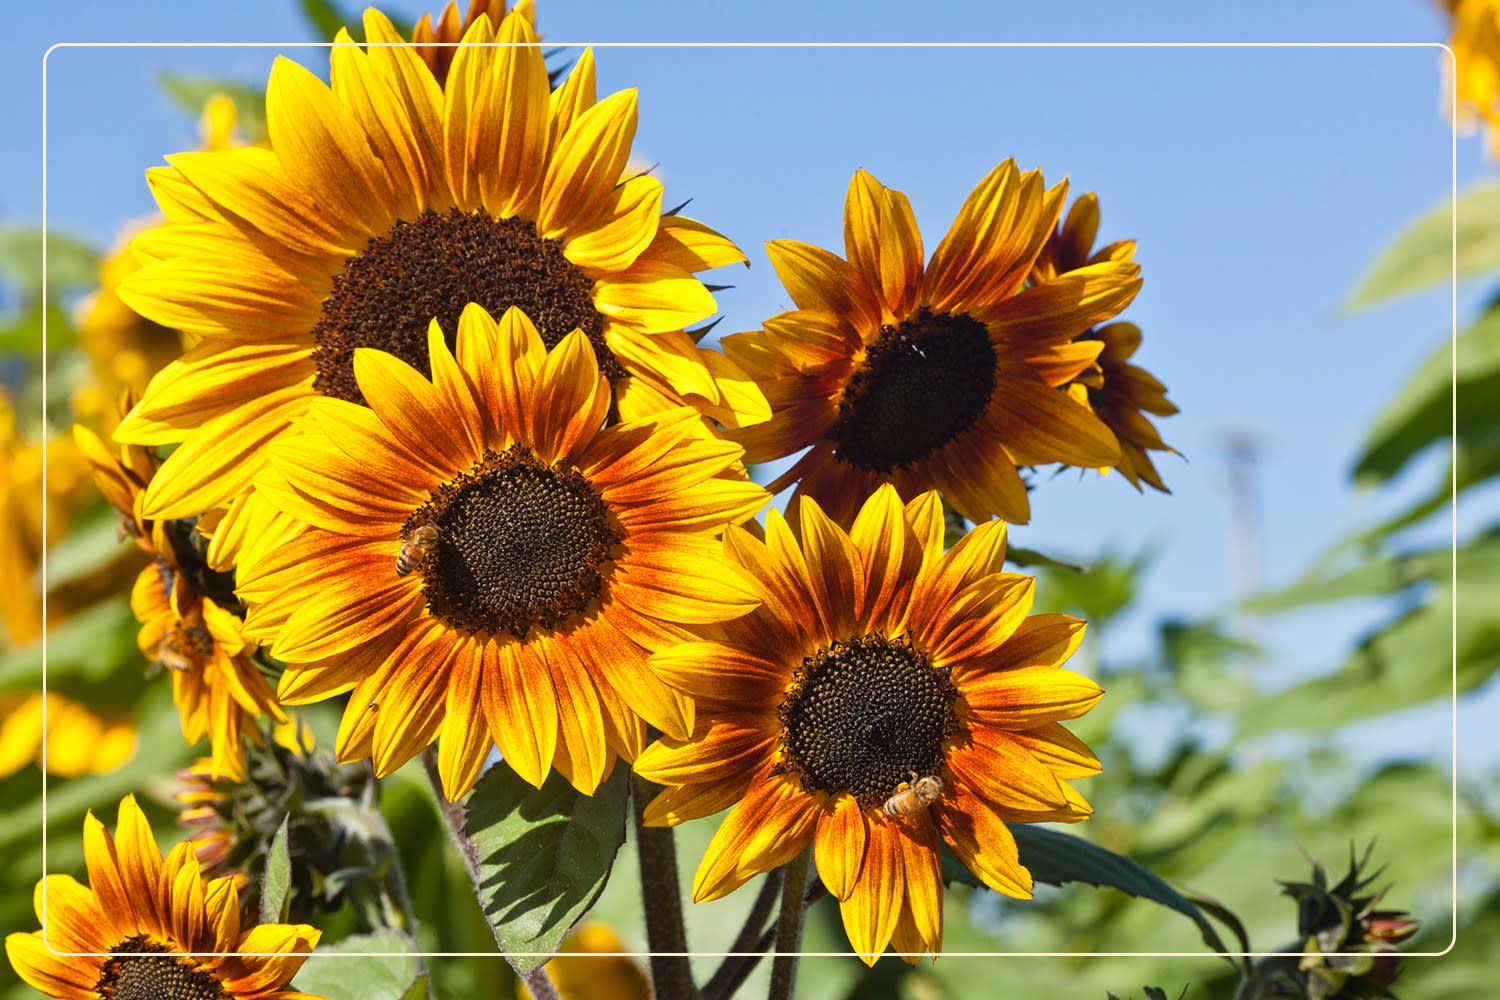 a closeup of Sunflowers (Helianthus), which are a pet-friendly plants, growing outdoors